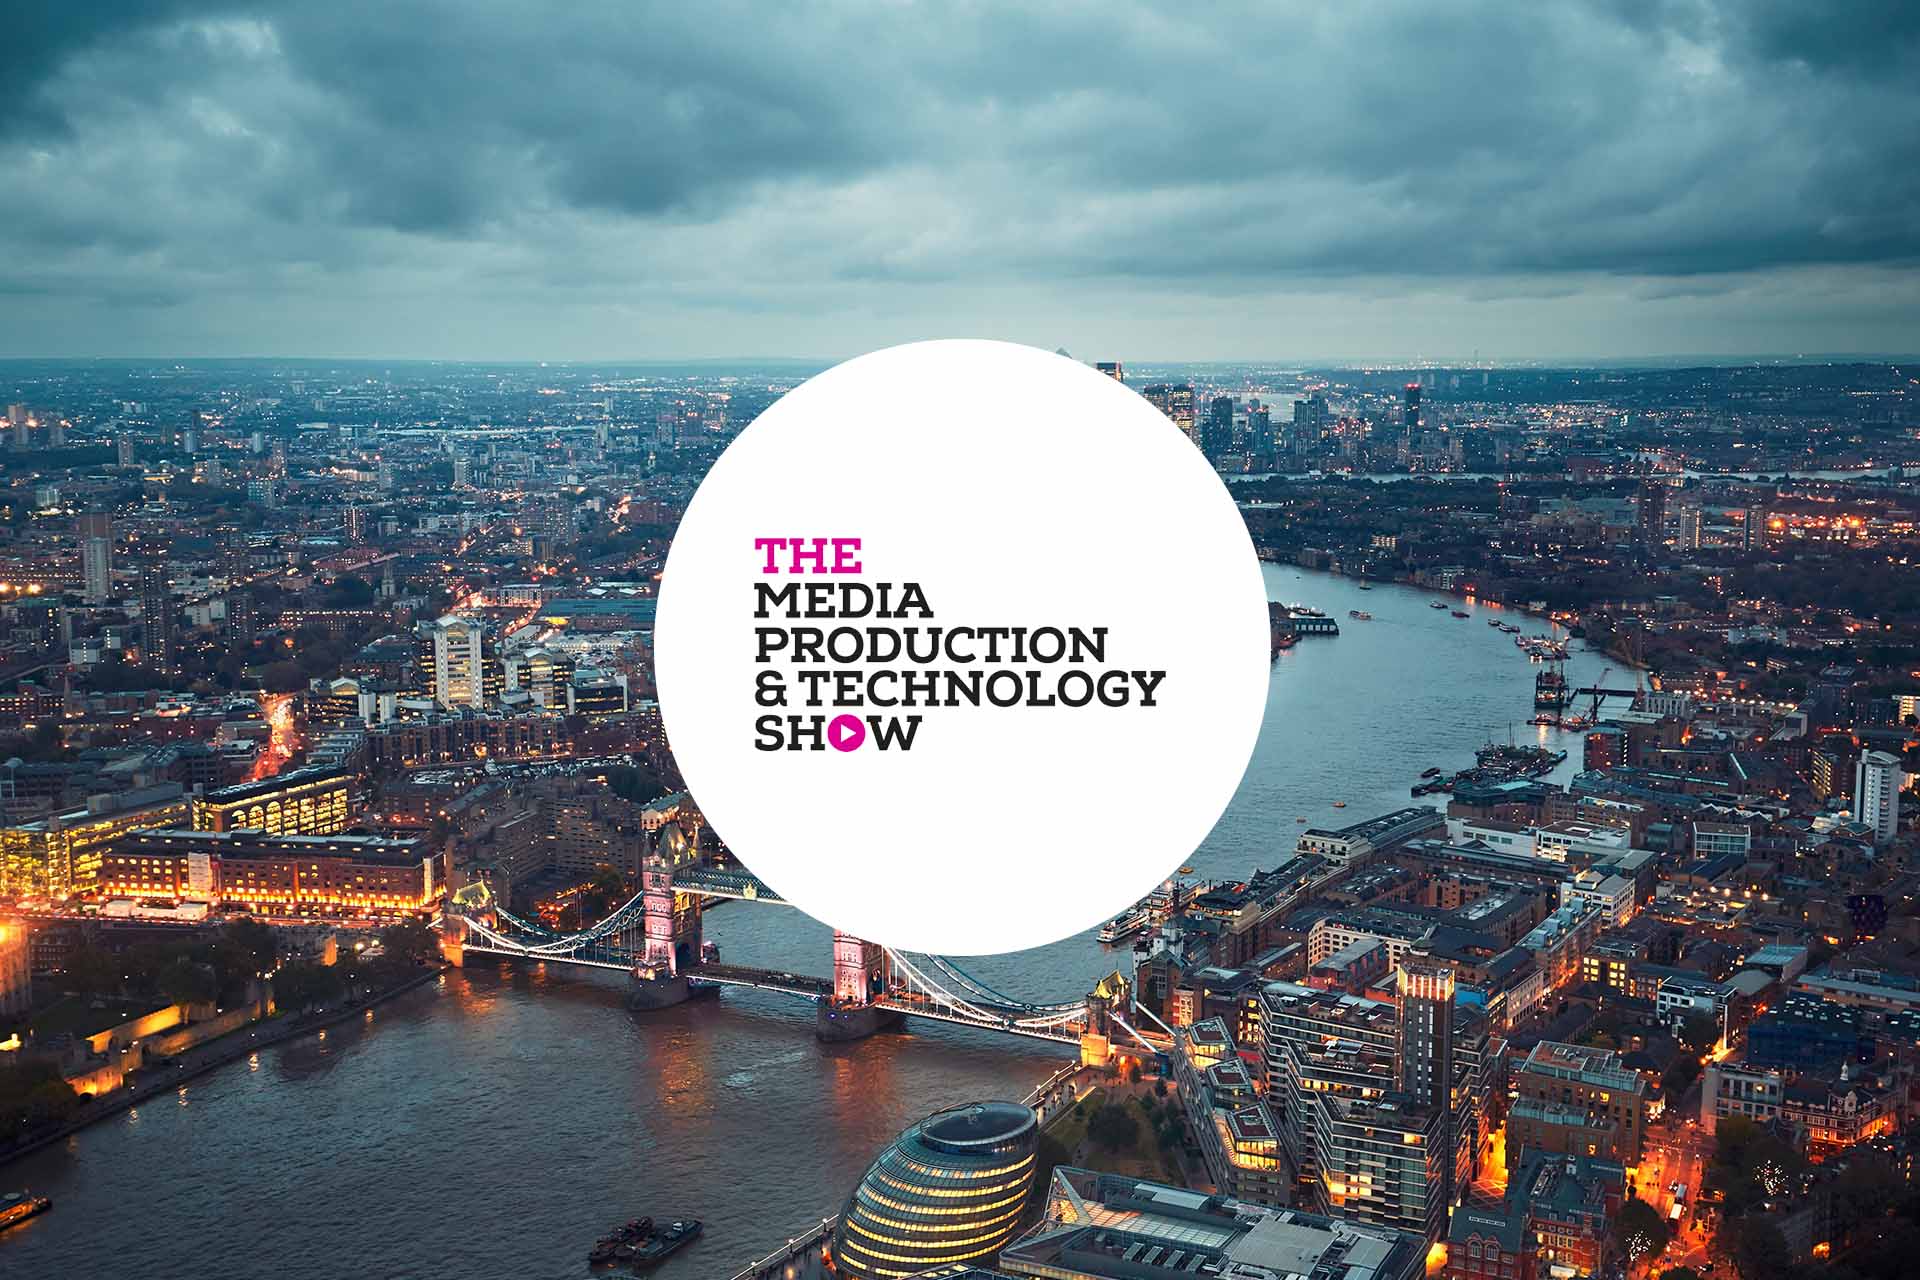 The Media Production & Technology Show